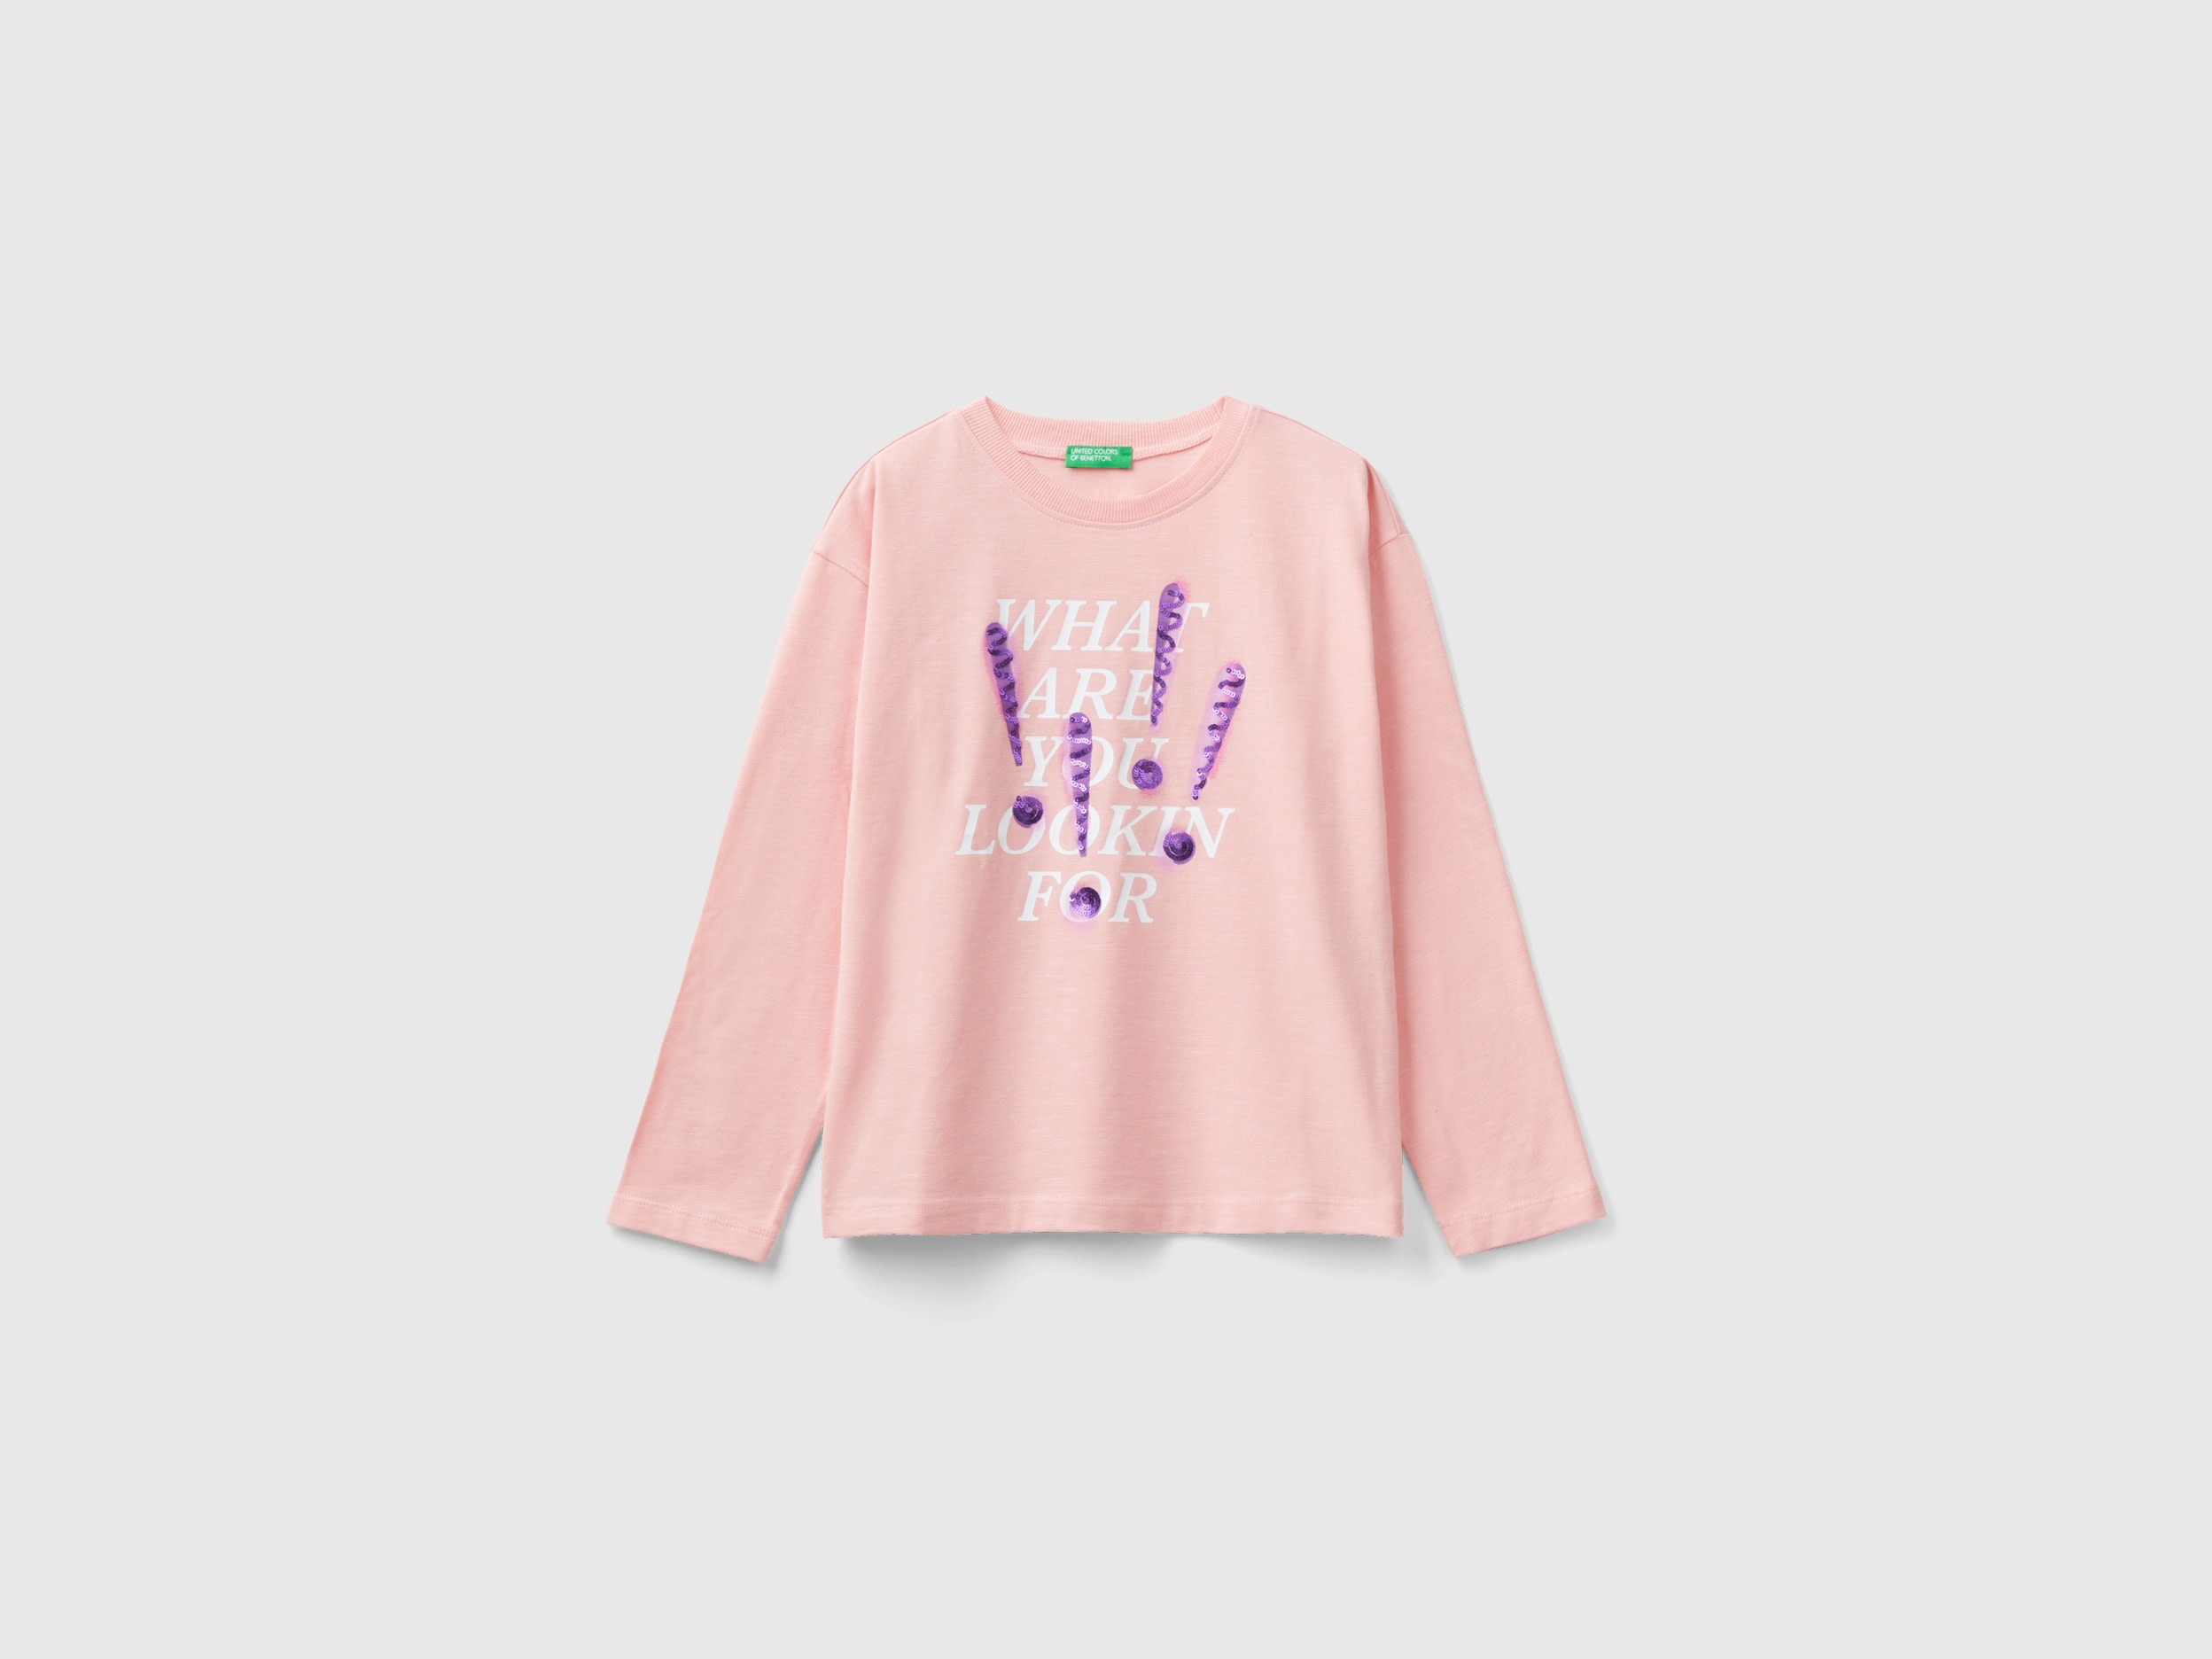 Benetton, T-shirt With Print And Sequins, size 2XL, Pink, Kids